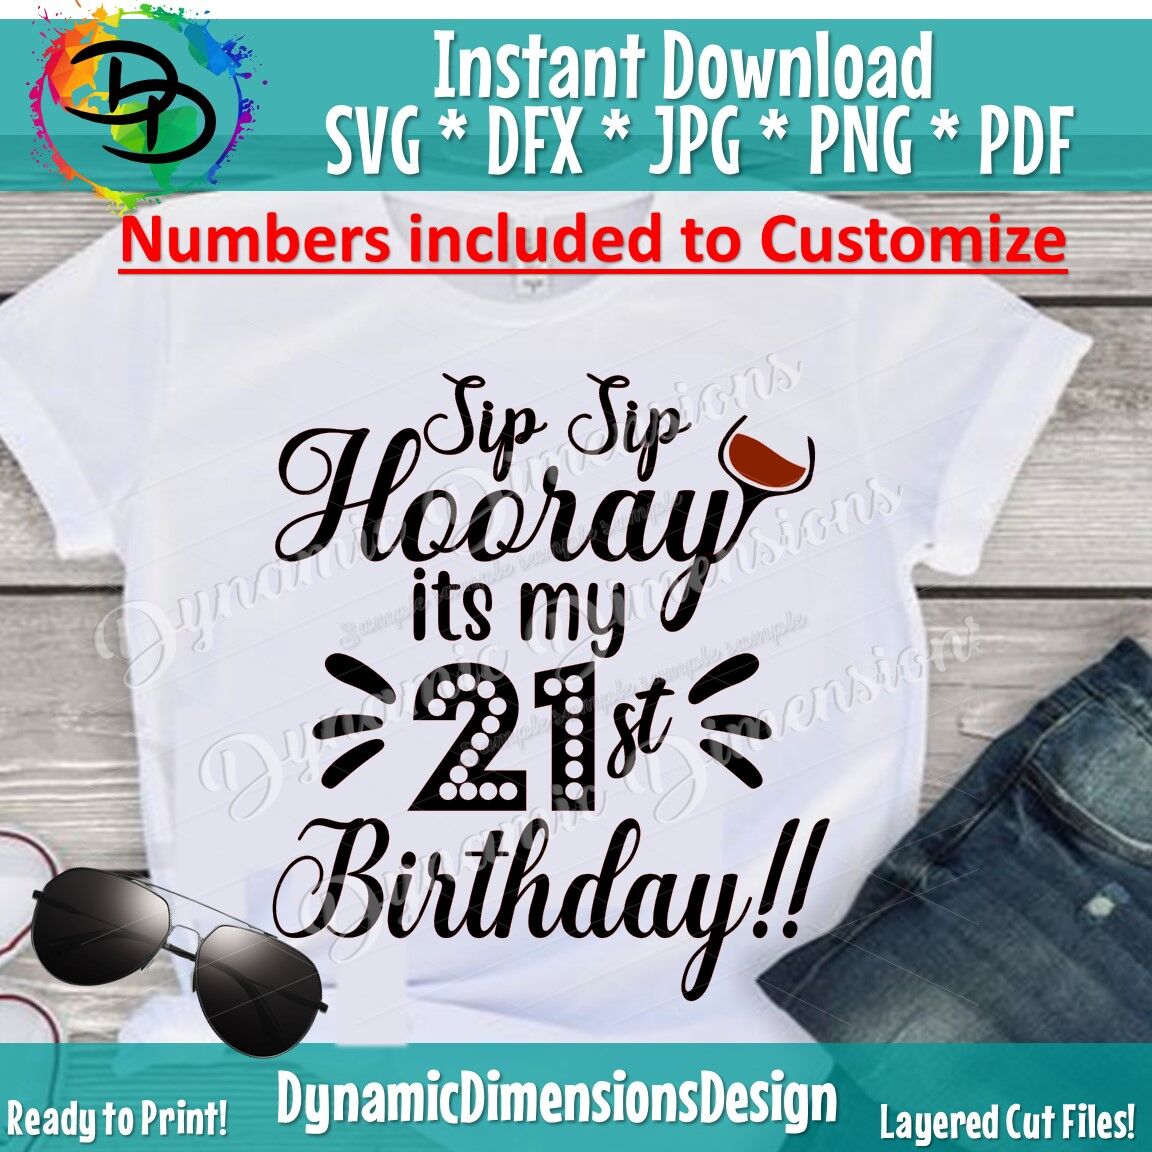 Download Its My Birthday Sip Sip Hooray Wine Svg Birthday Svg Birthday Shi By Dynamic Dimensions Thehungryjpeg Com SVG, PNG, EPS, DXF File